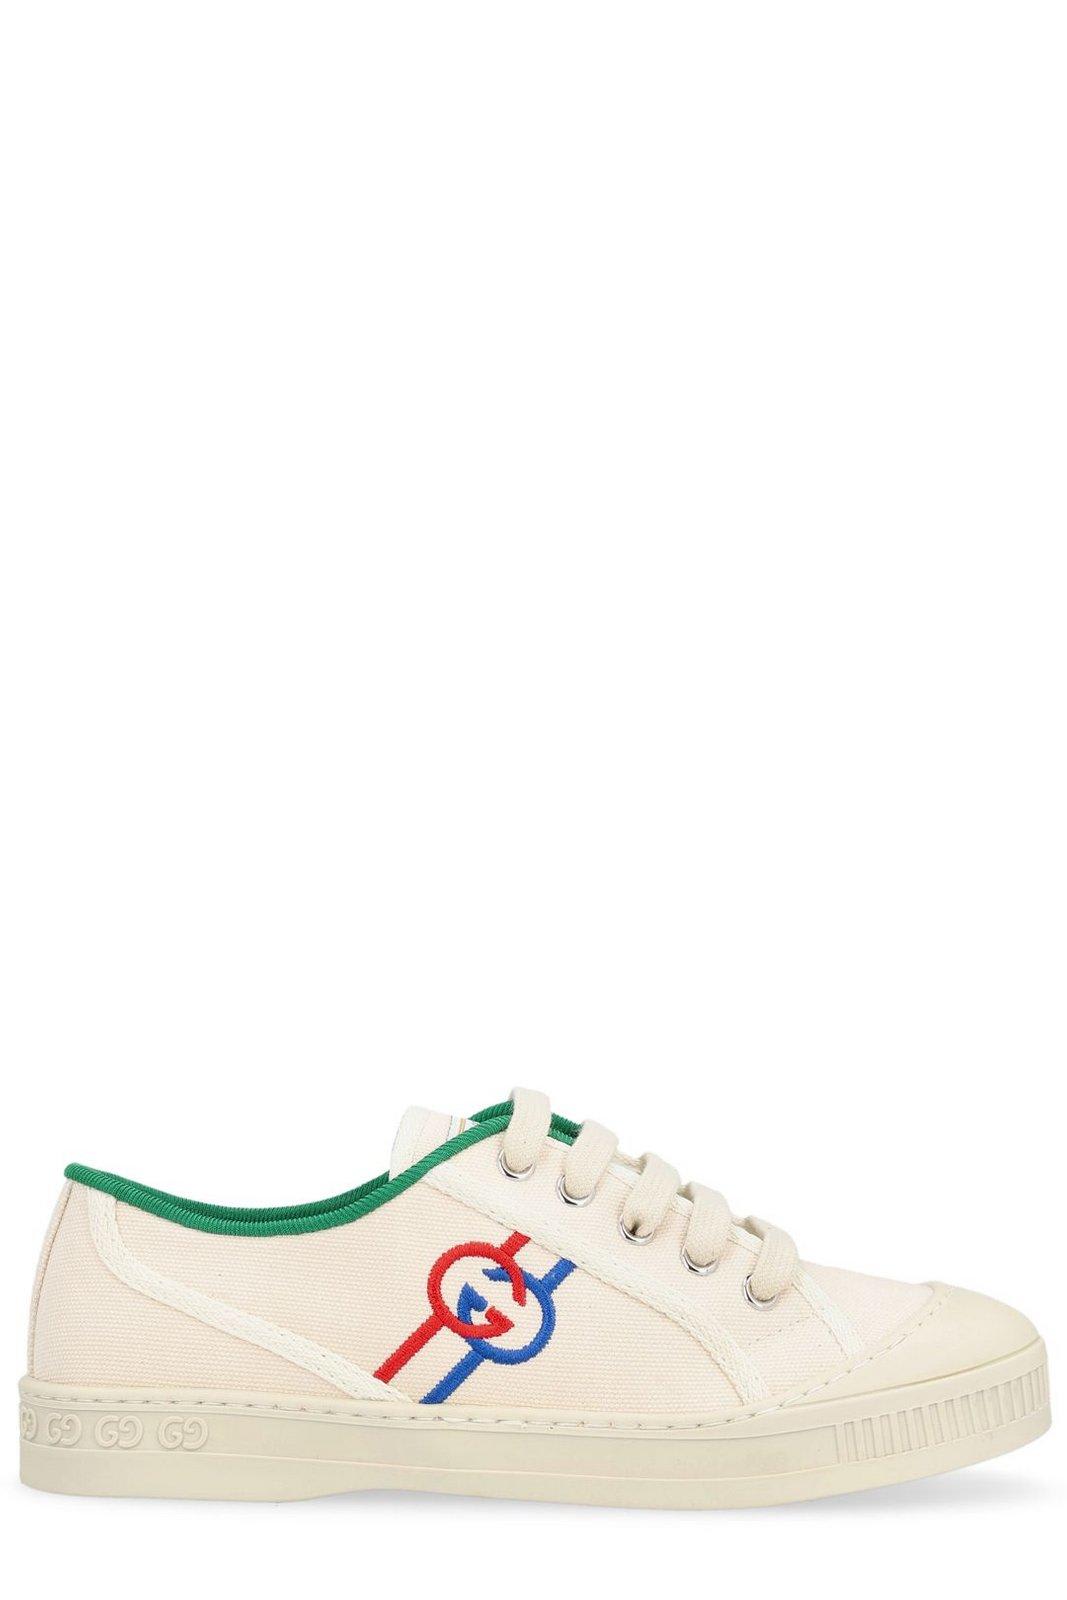 Gucci Tennis 1977 Lace-up Sneakers